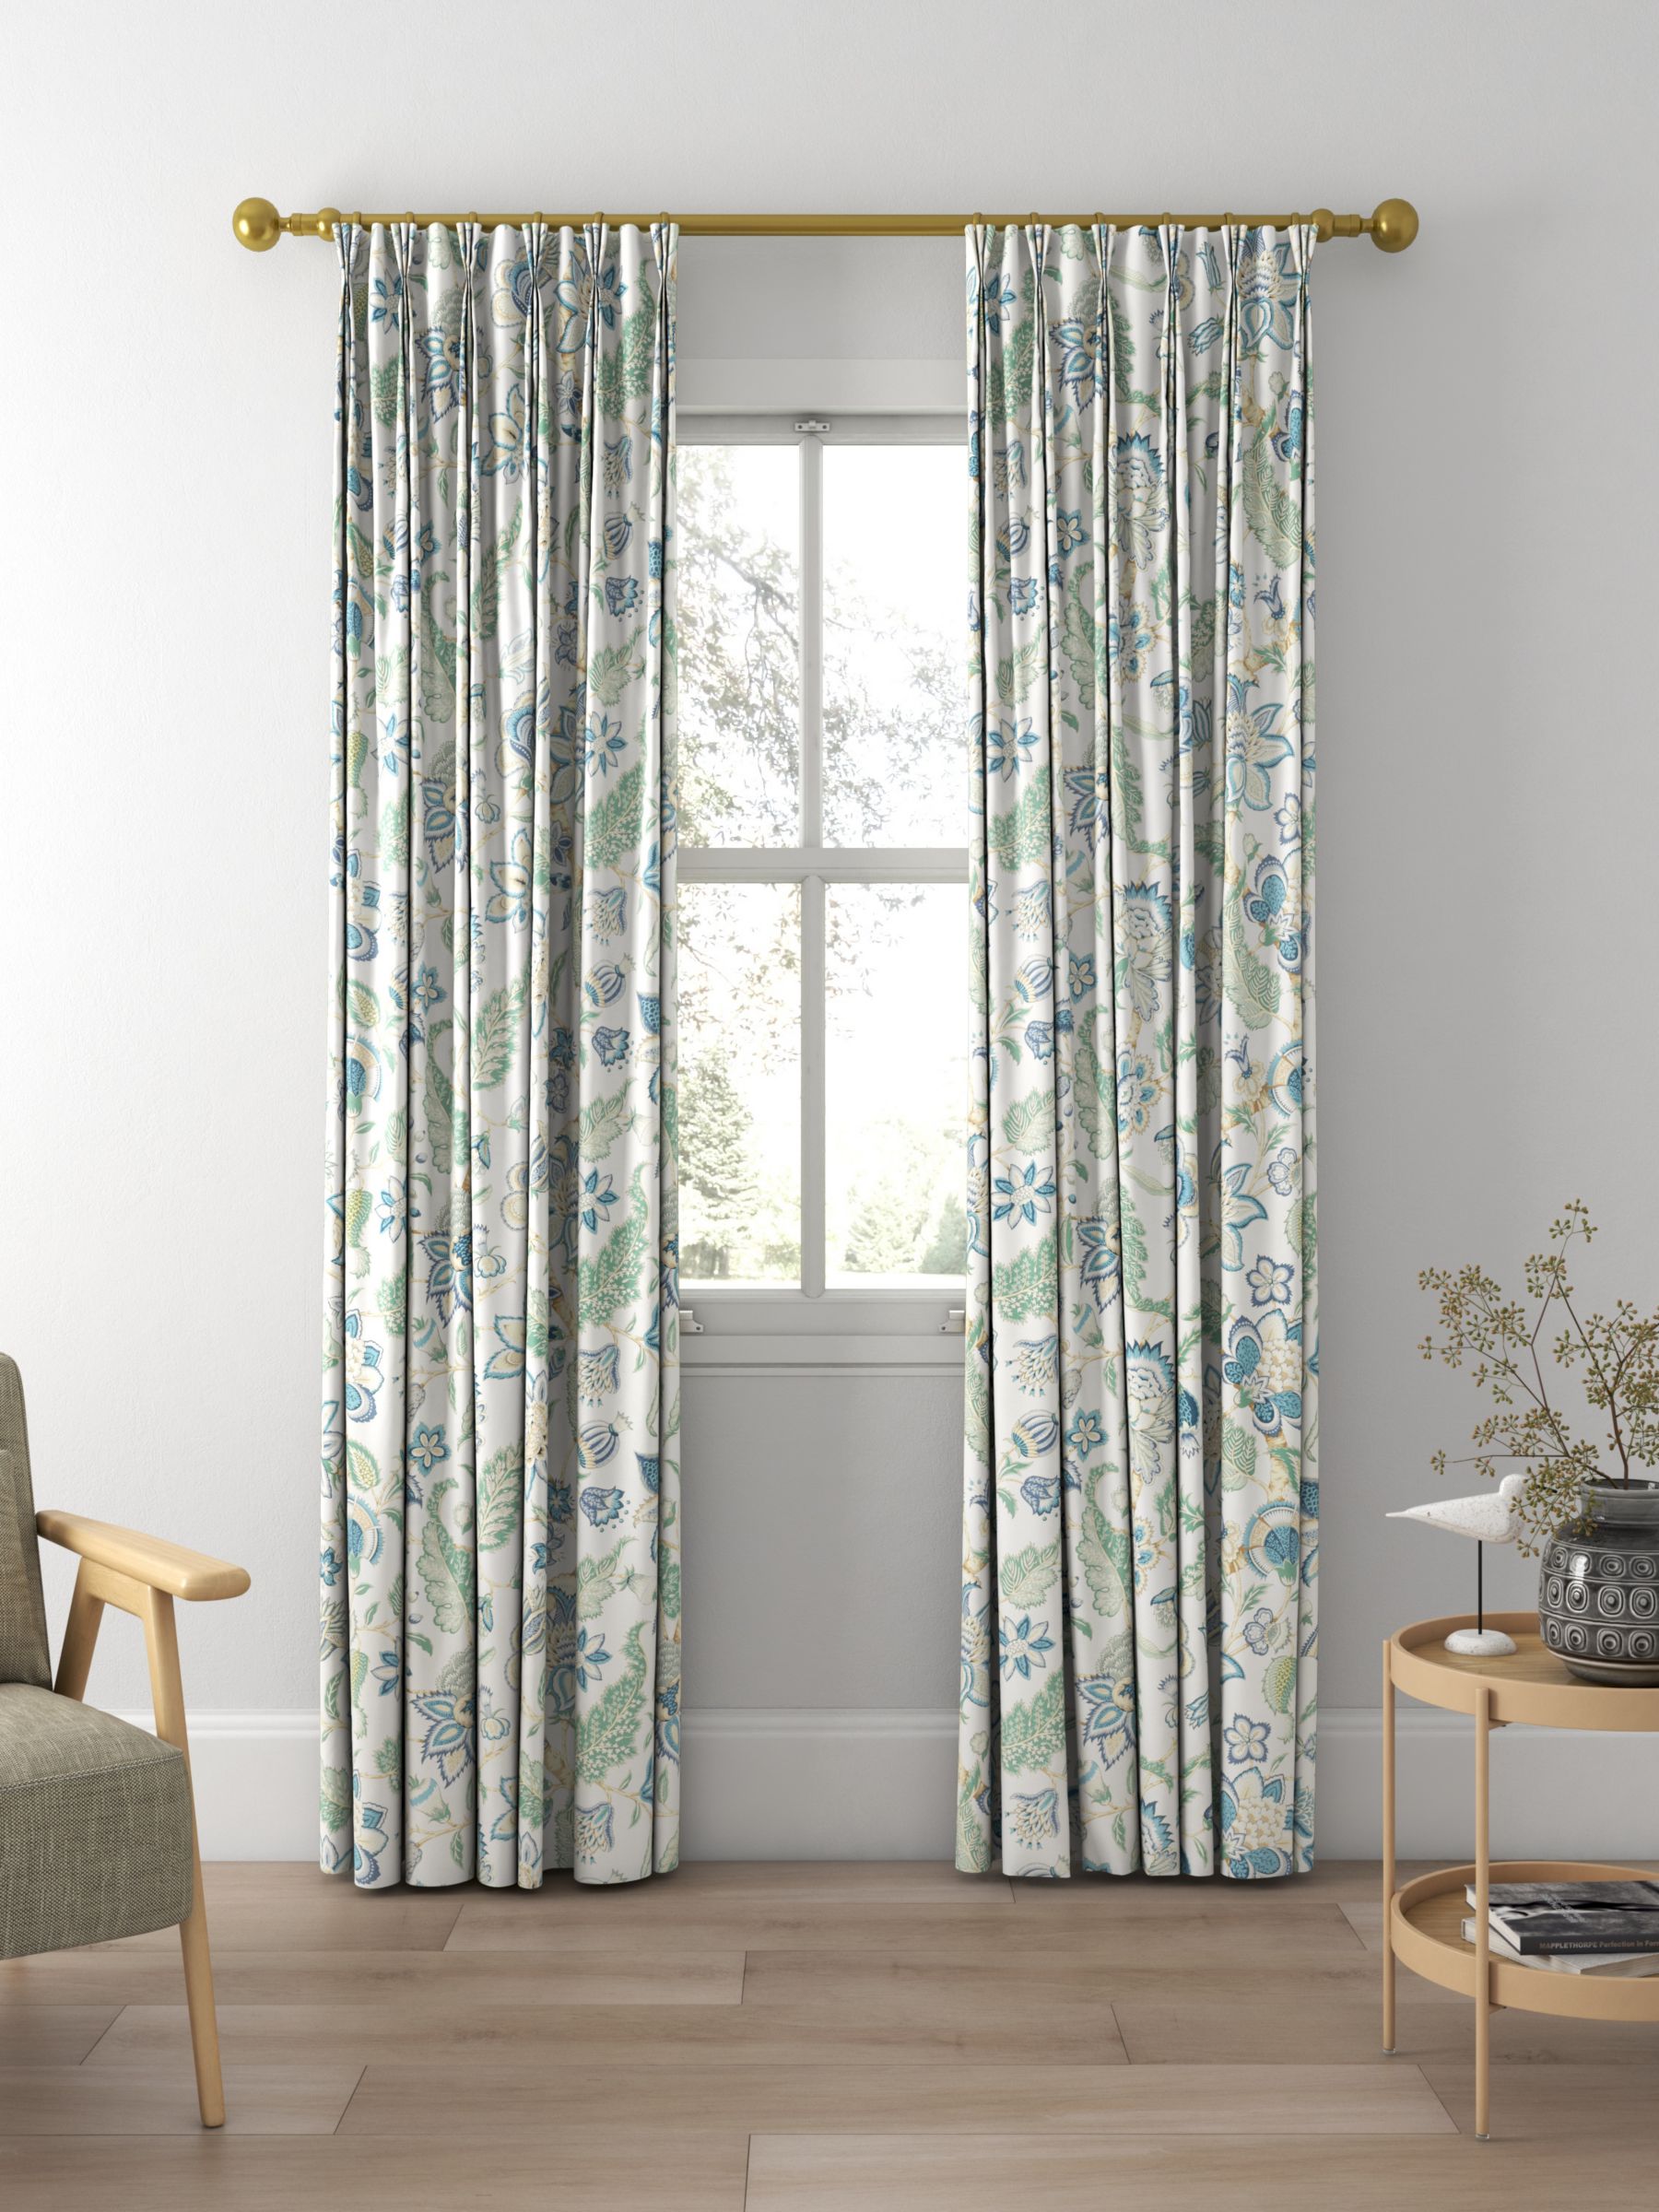 Sanderson Newnham Courtney Made to Measure Curtains or Roman Blind ...